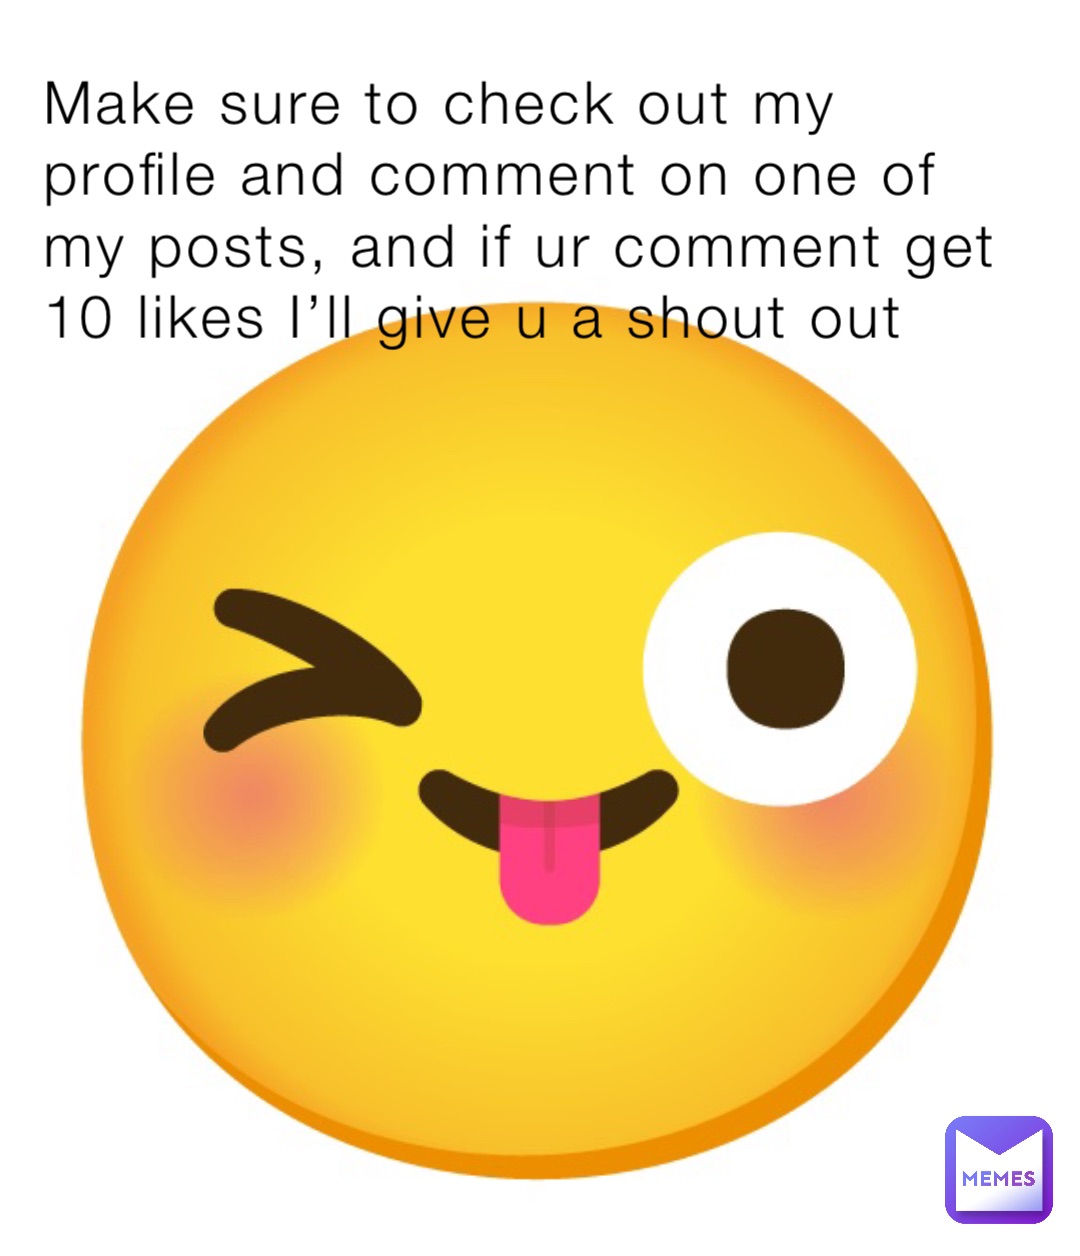 Make sure to check out my profile and comment on one of my posts, and if ur comment get 10 likes I’ll give u a shout out